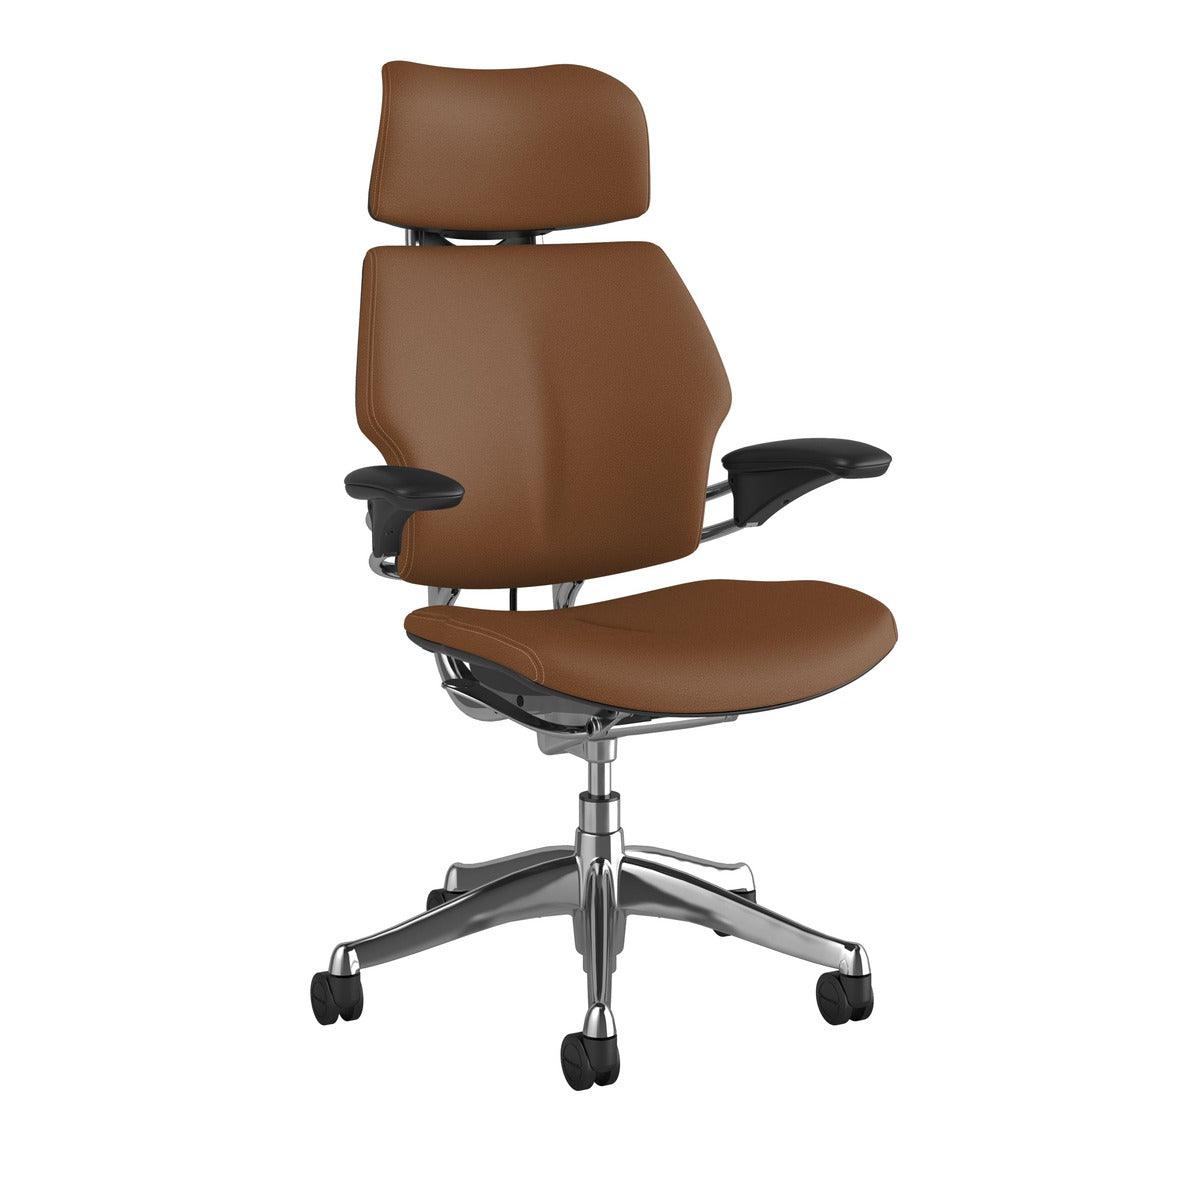 Fauteuil inclinable avec appui-tête Freedom - Cuir Corvara Saddle/Tan - 37+ Design